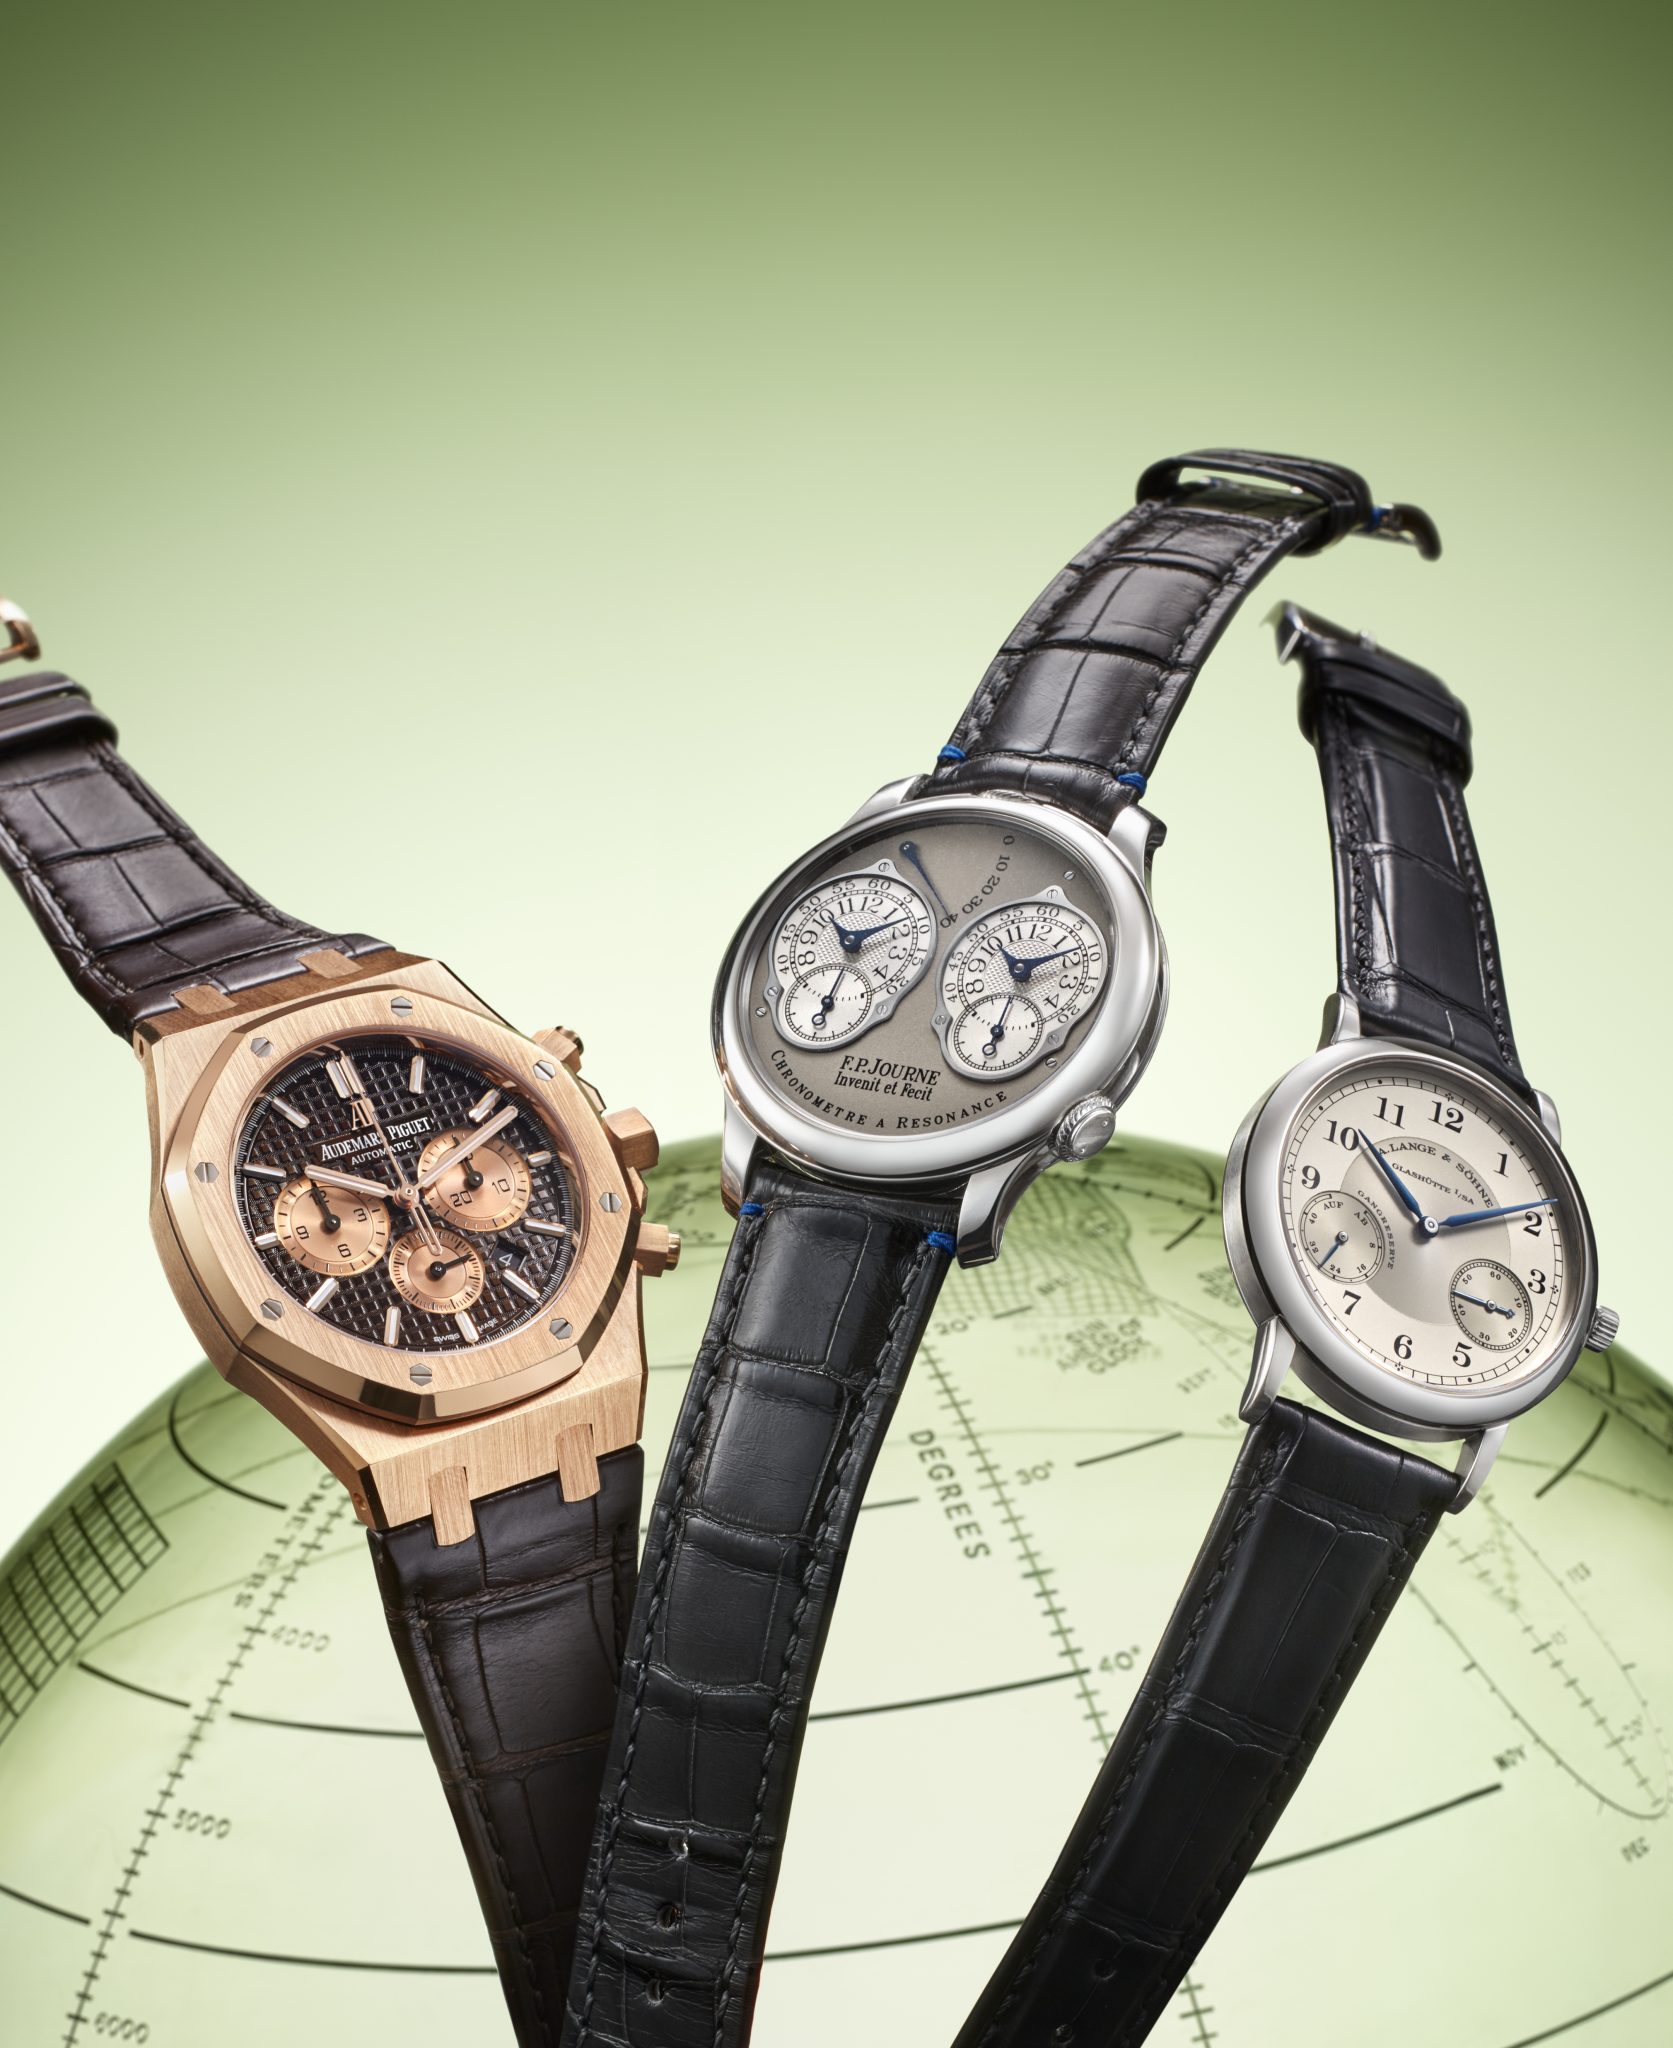 CORDER'S COLUMN: Rolex Is Bigger Than The Whole Of Swatch Group